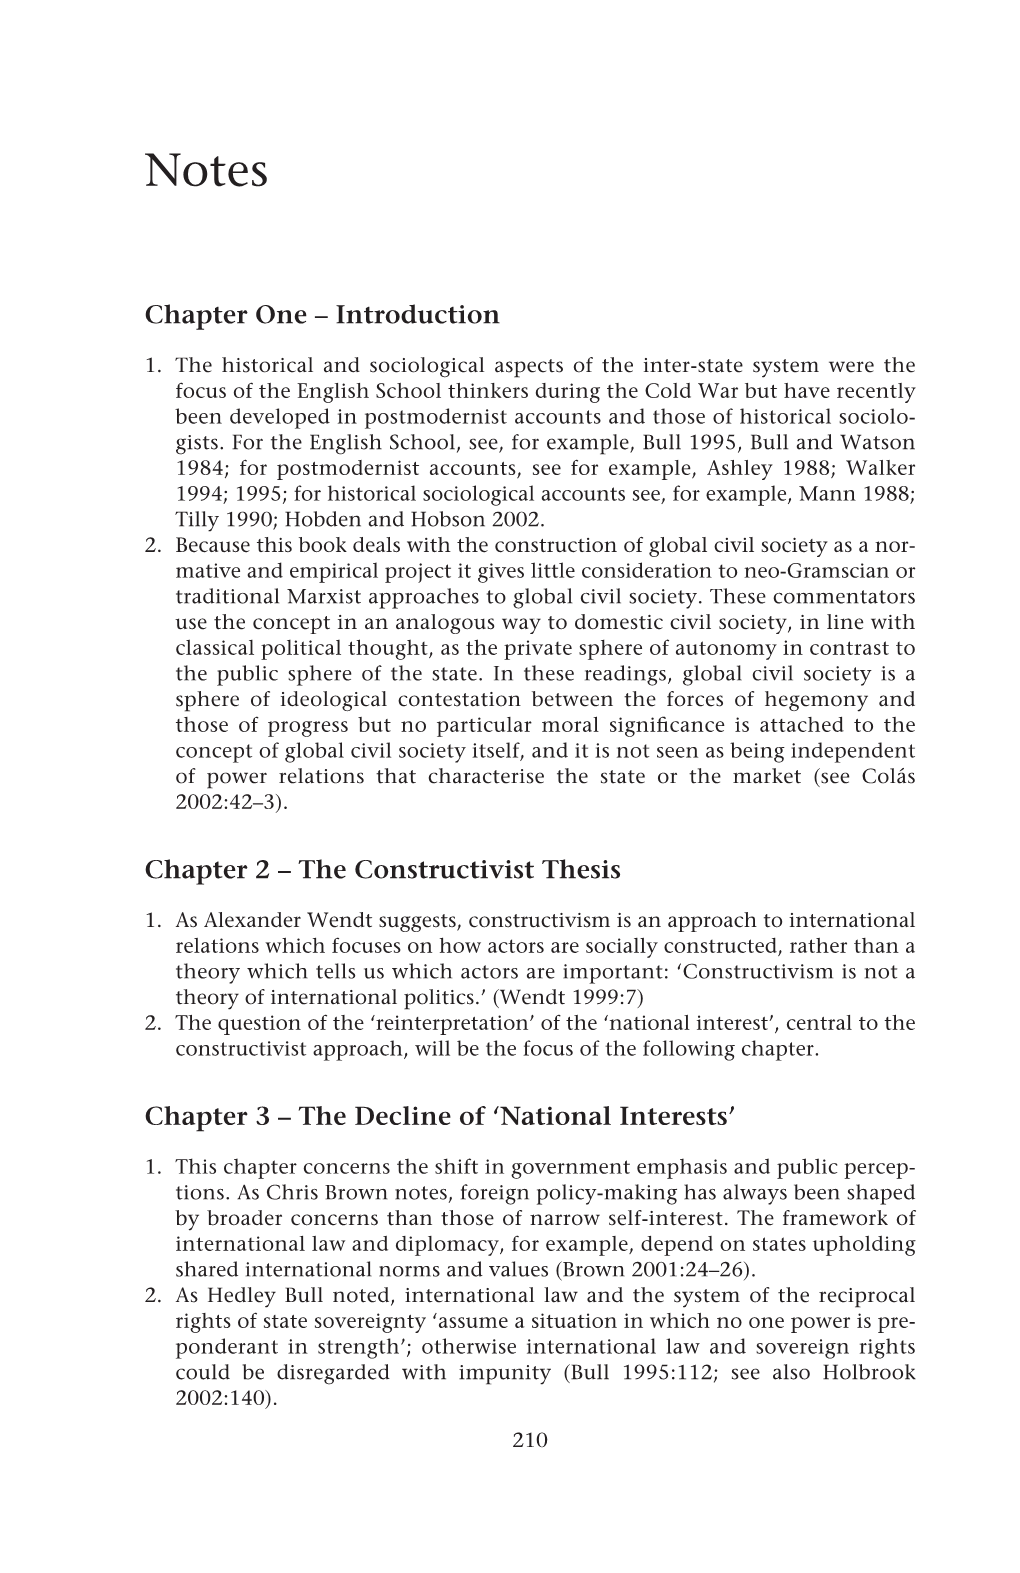 The Constructivist Thesis Chapter 3